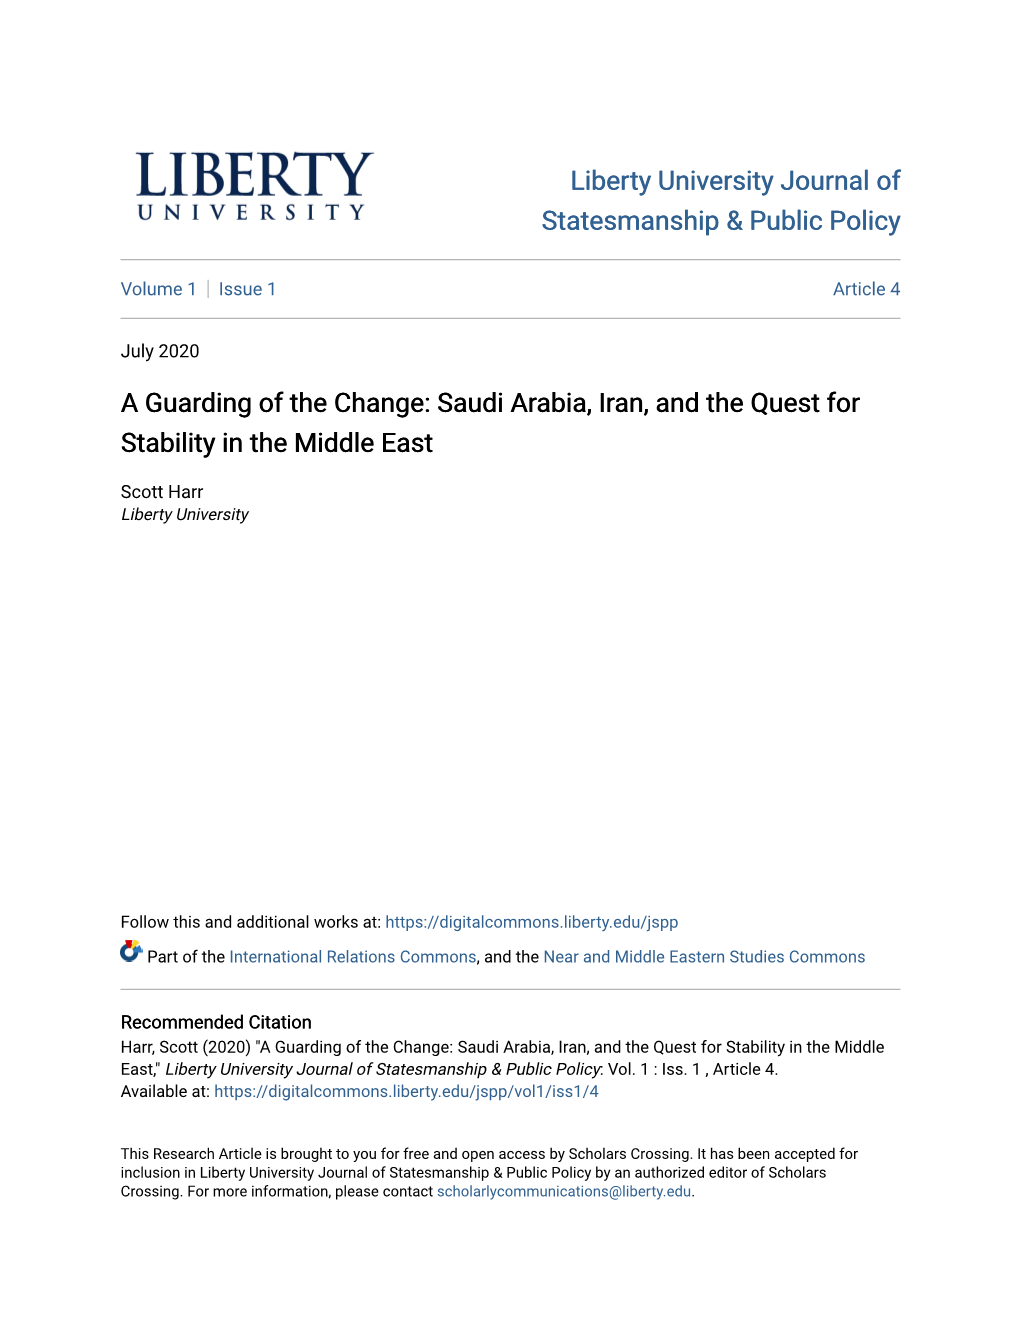 A Guarding of the Change: Saudi Arabia, Iran, and the Quest for Stability in the Middle East